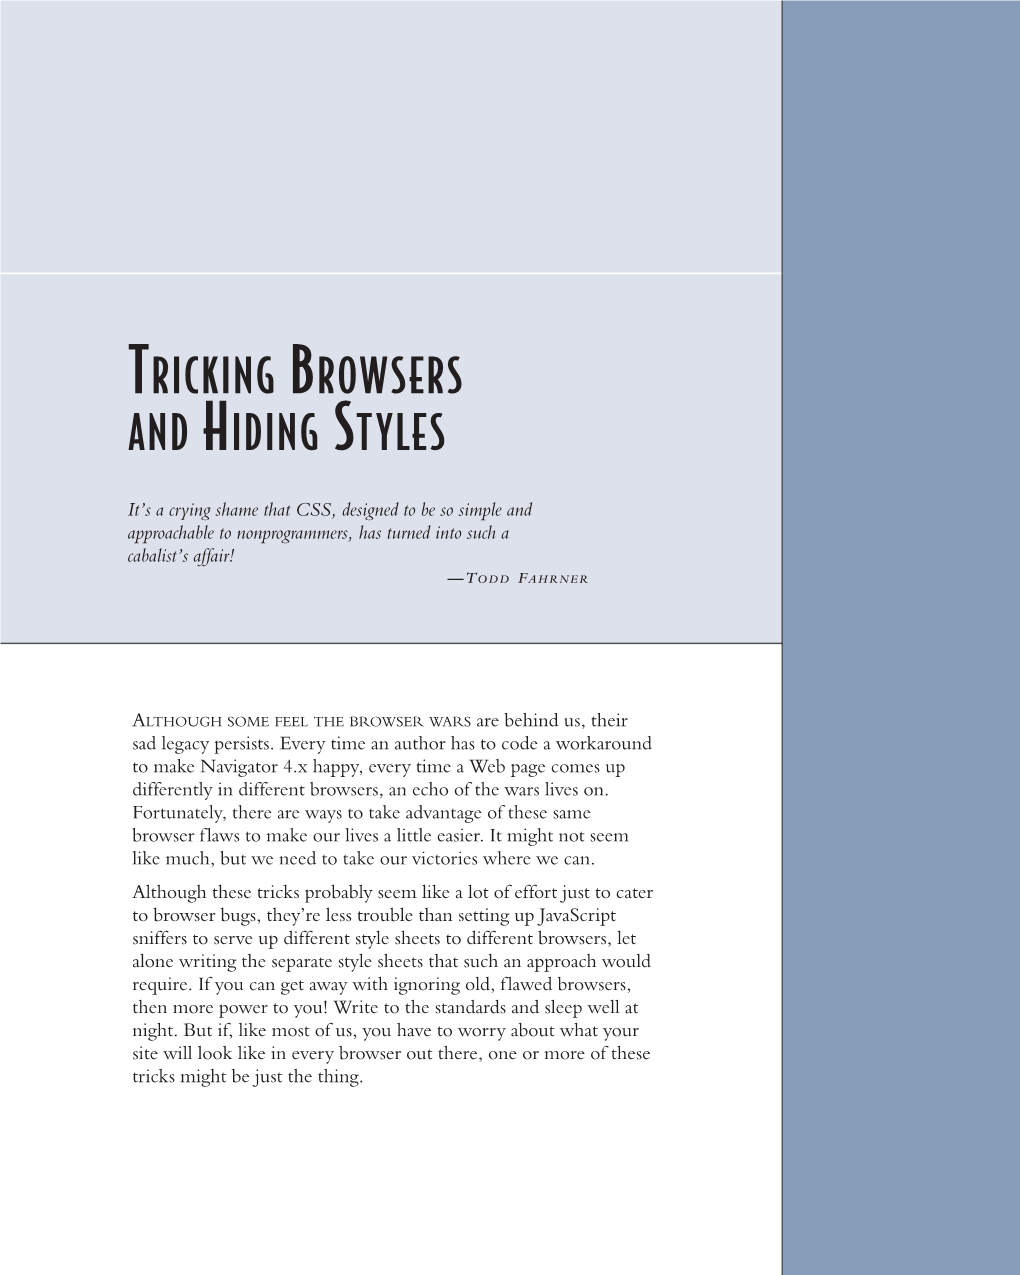 Tricking Browsers and Hiding Styles